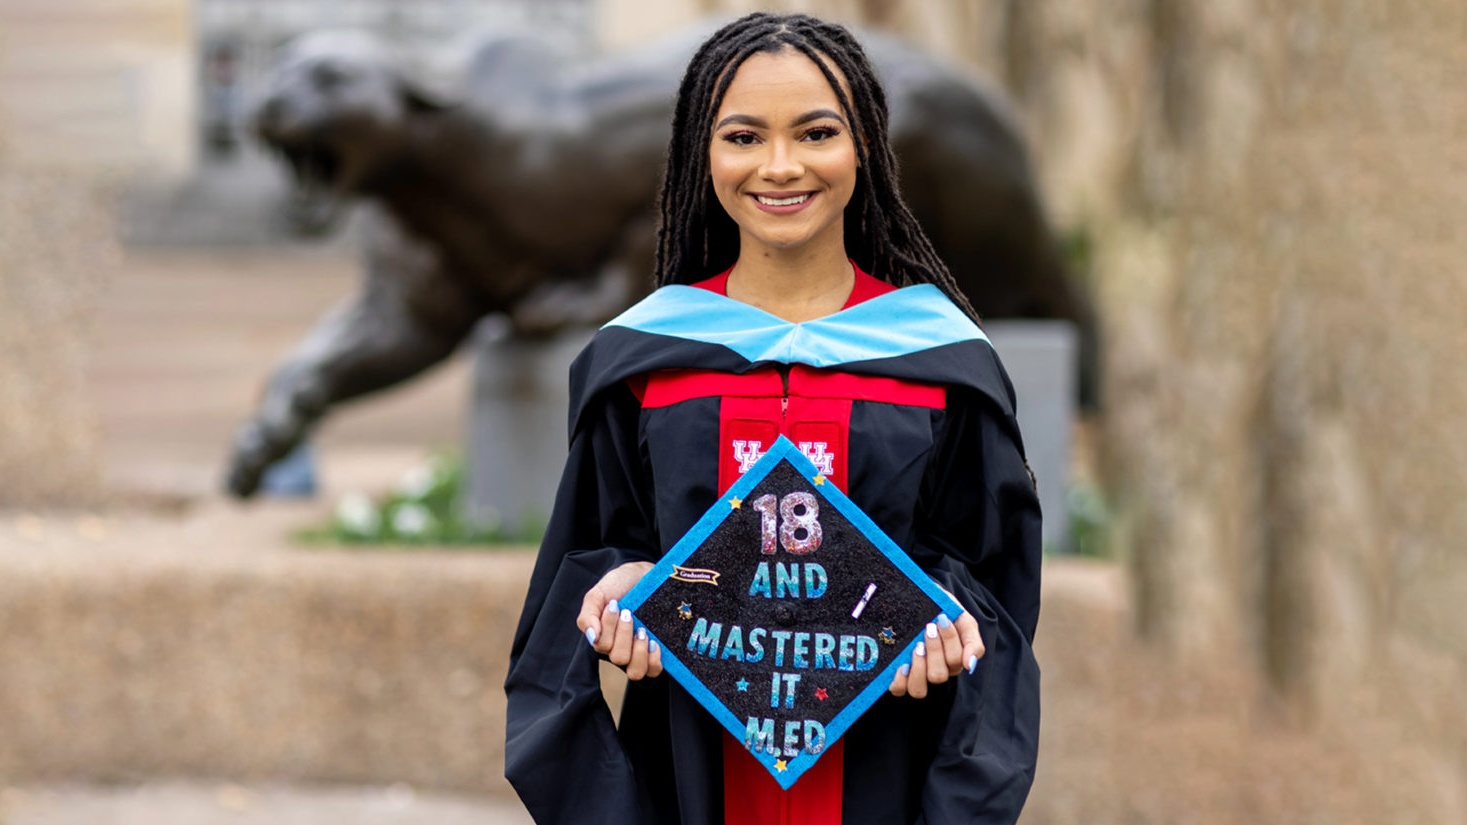 Salenah Cartier, 18, Becomes The University of Houston’s Youngest Graduate